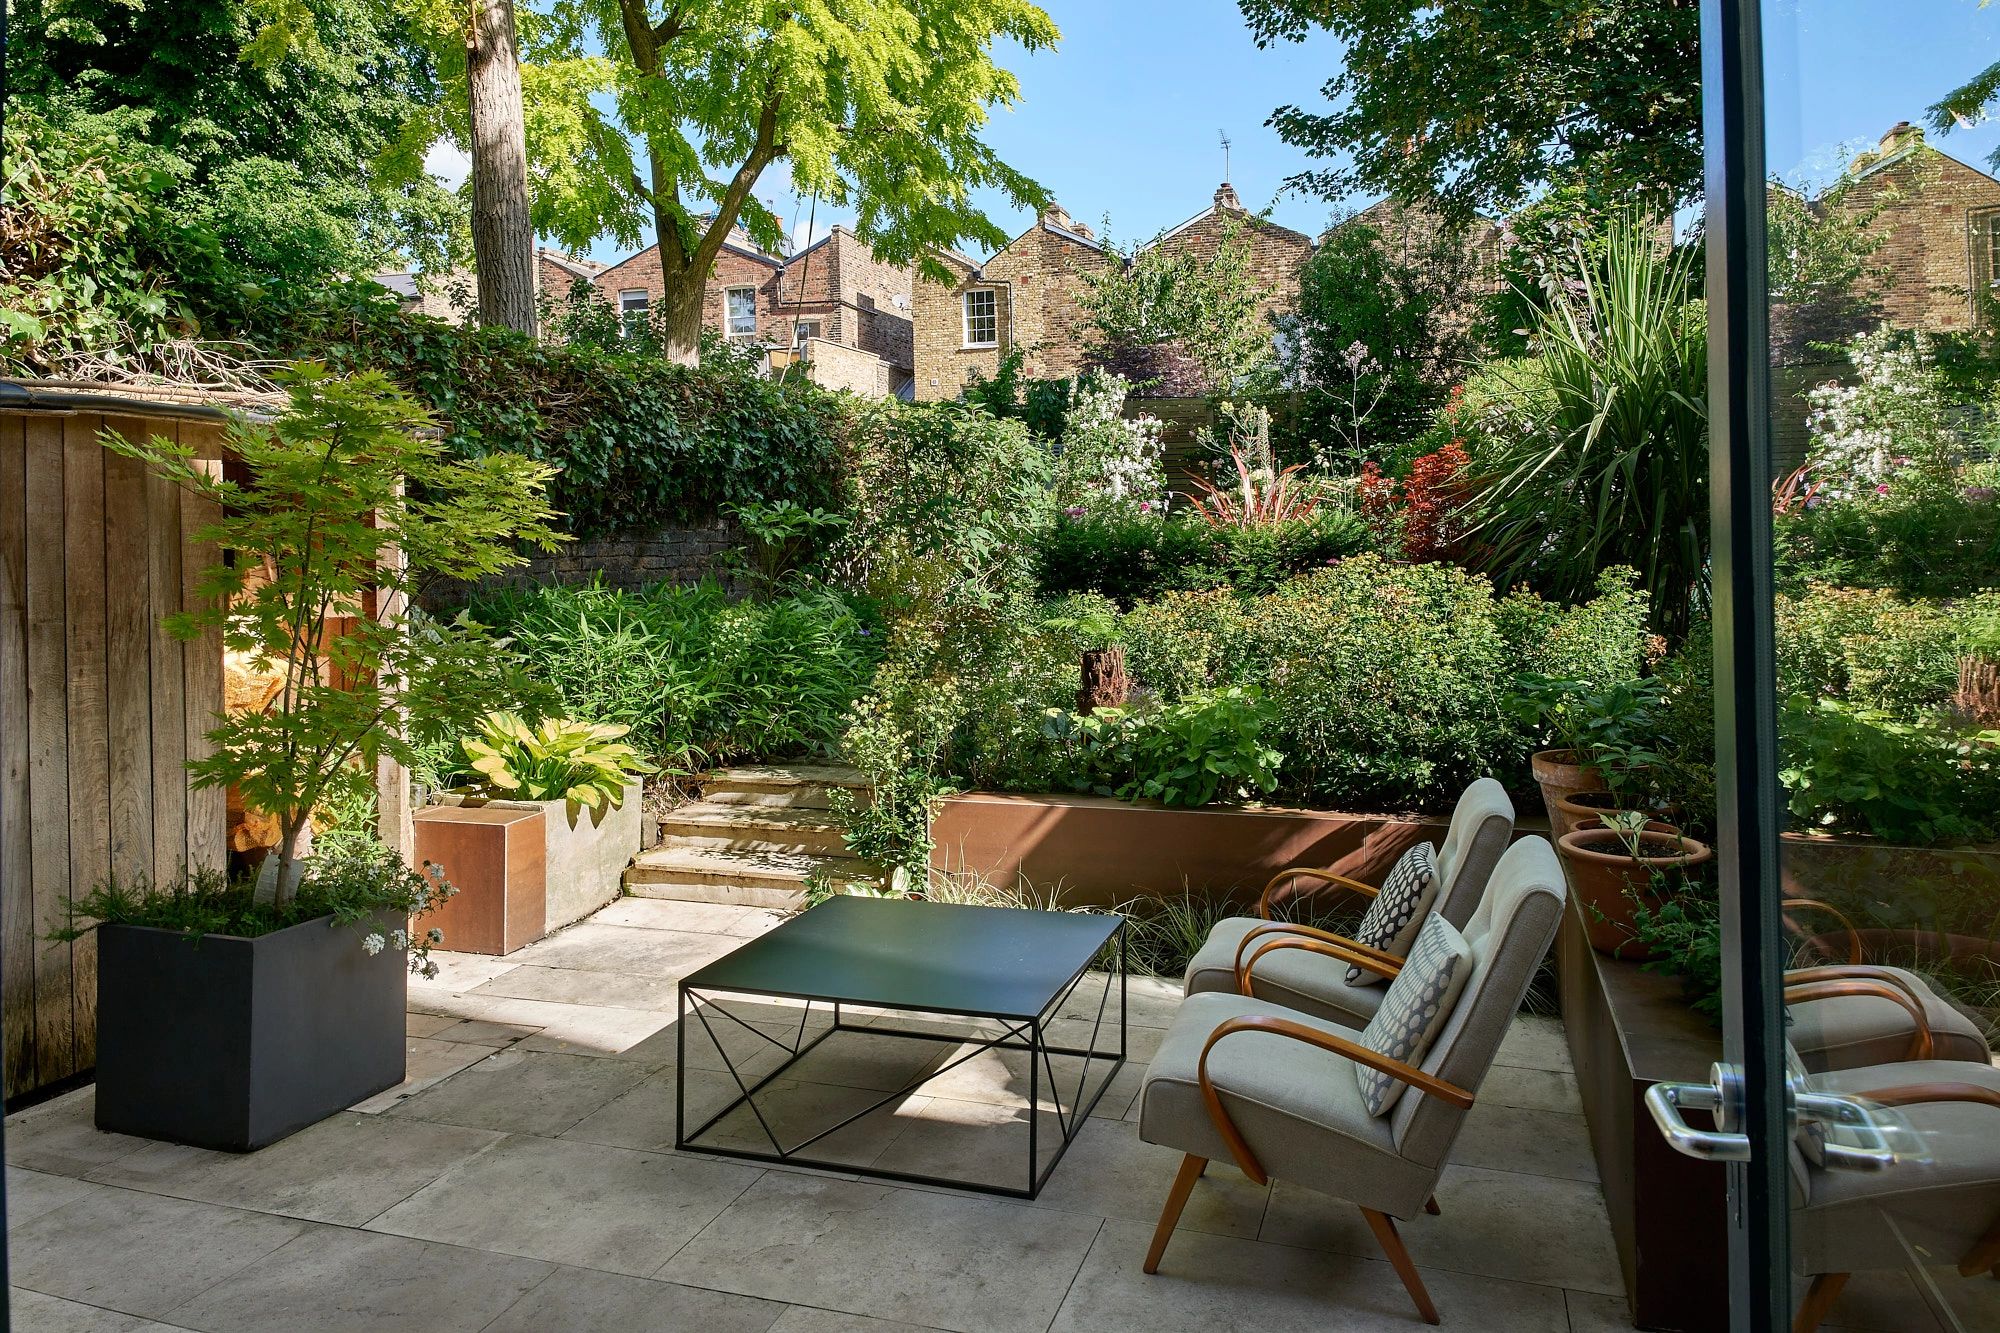 Garden terrace with low chairs and steps and porcelain cladding